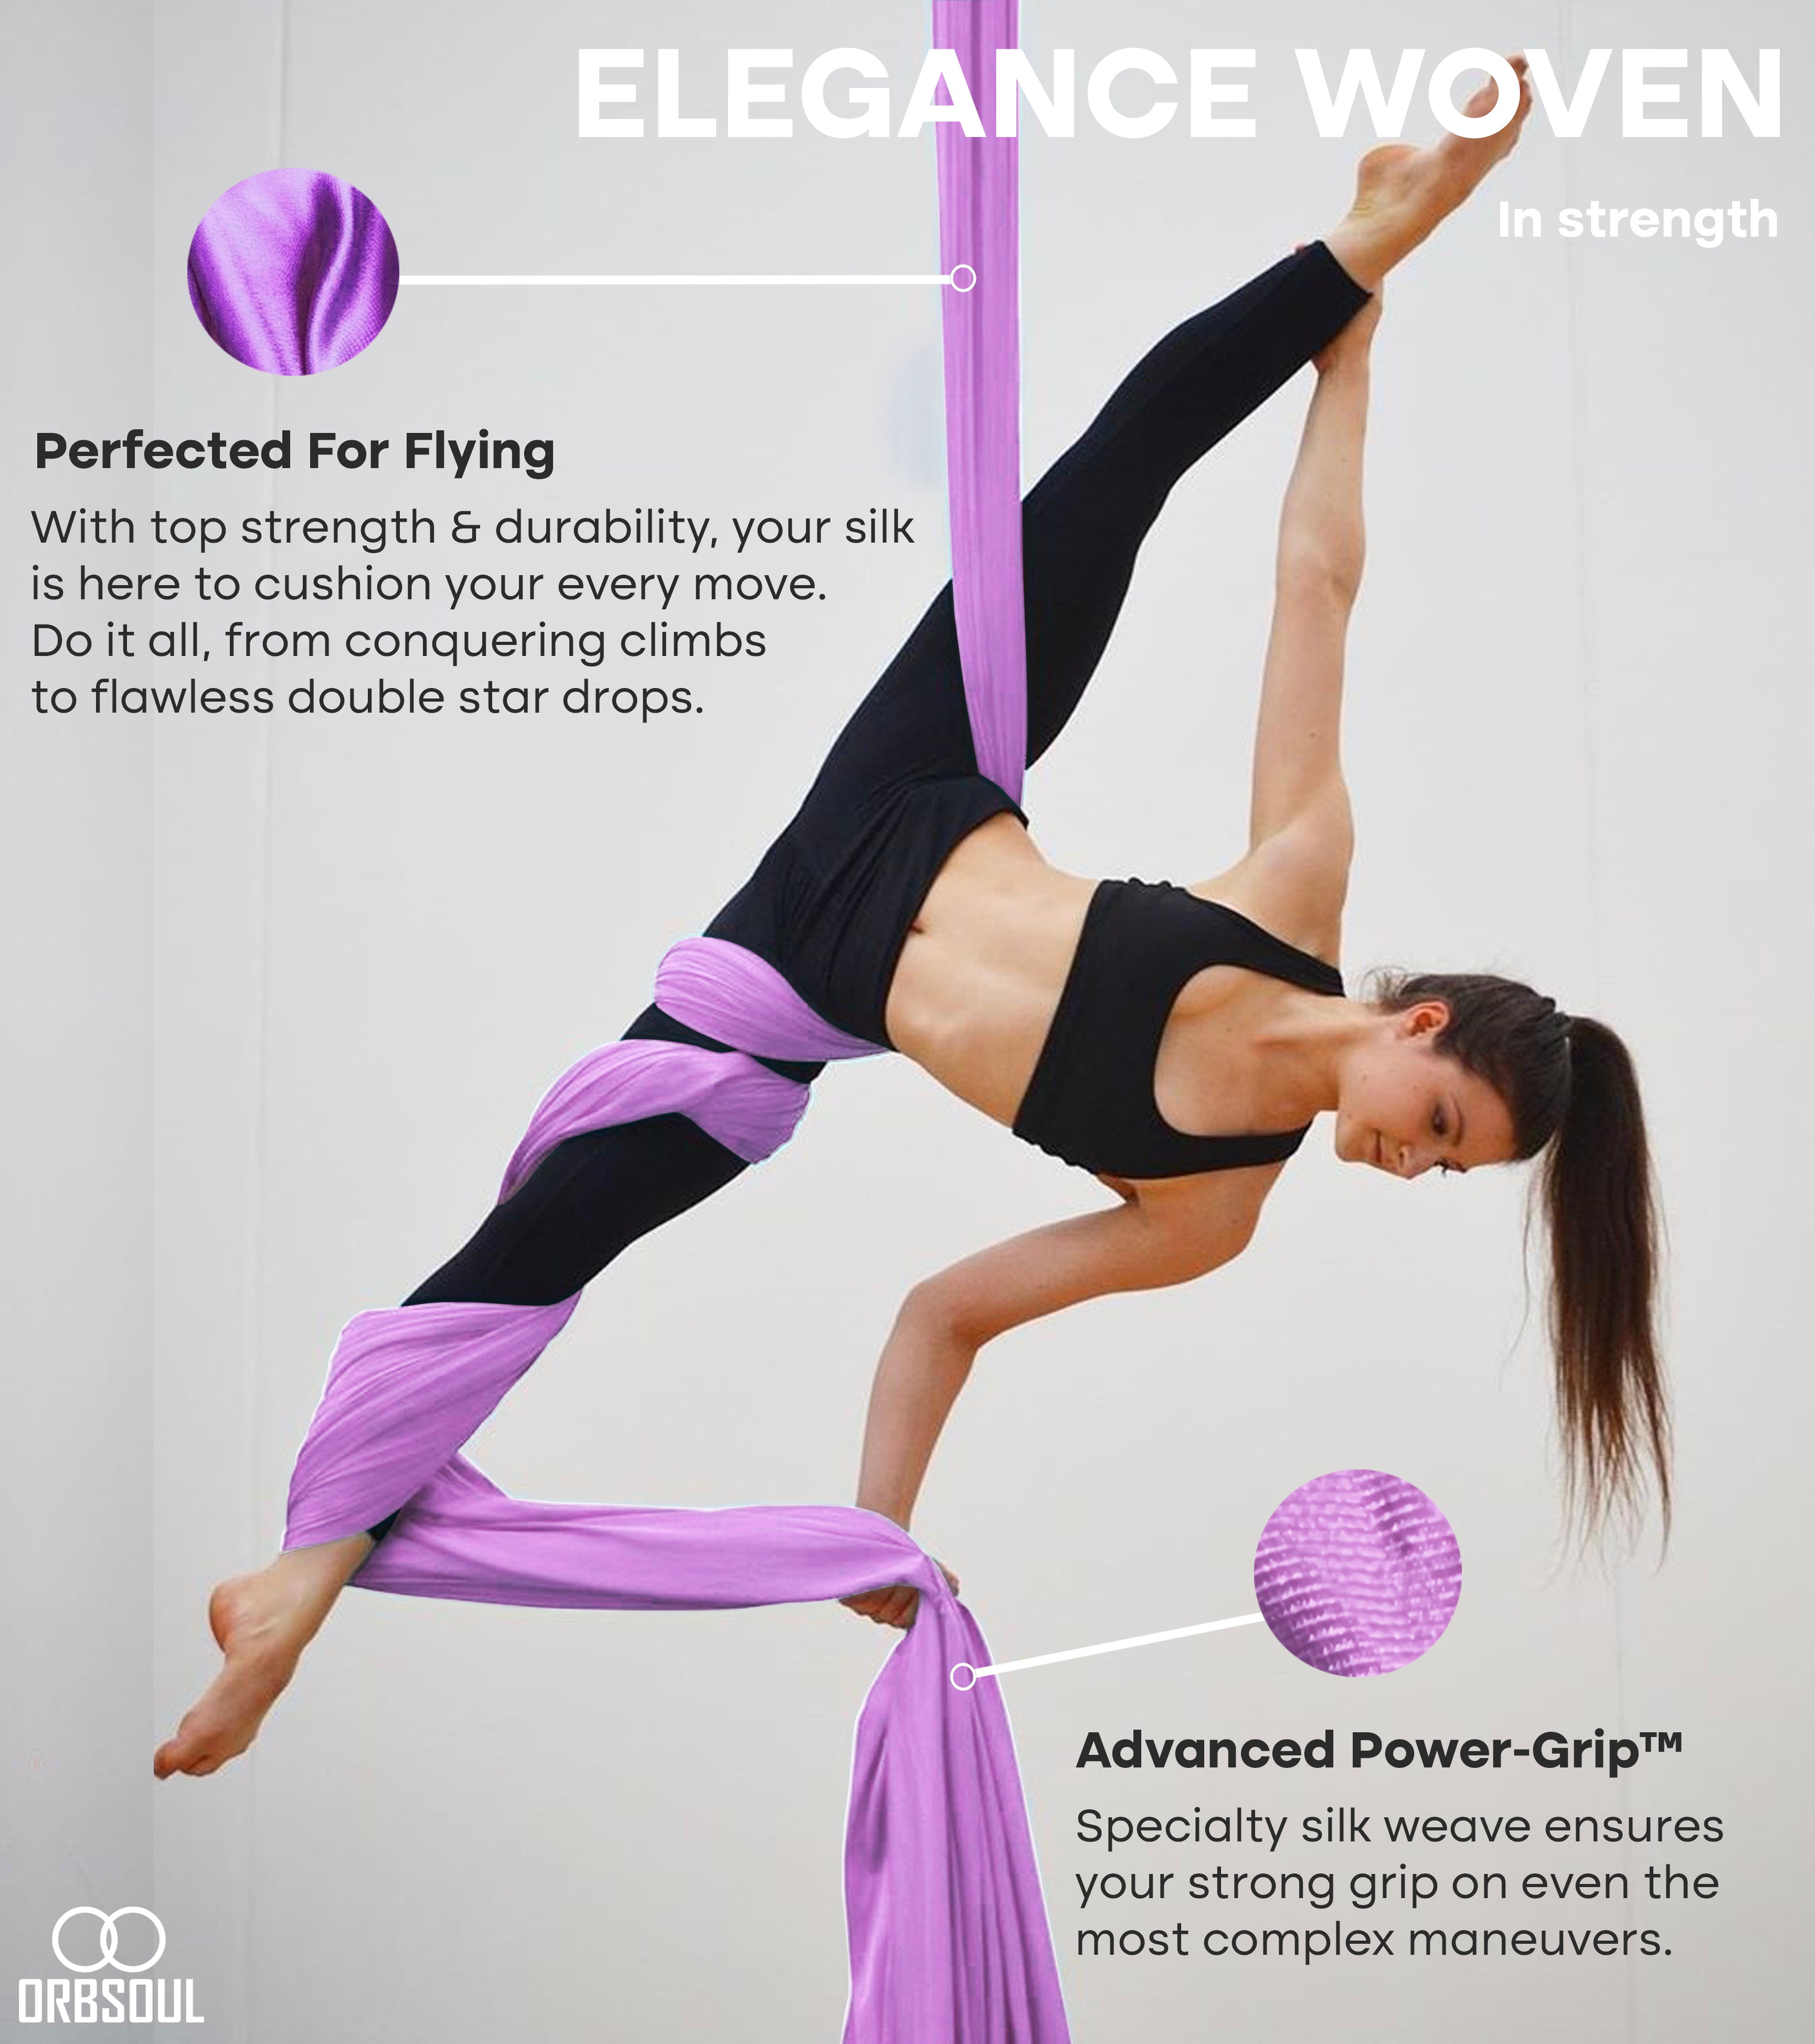 Aerial fabric. Perfected for flying